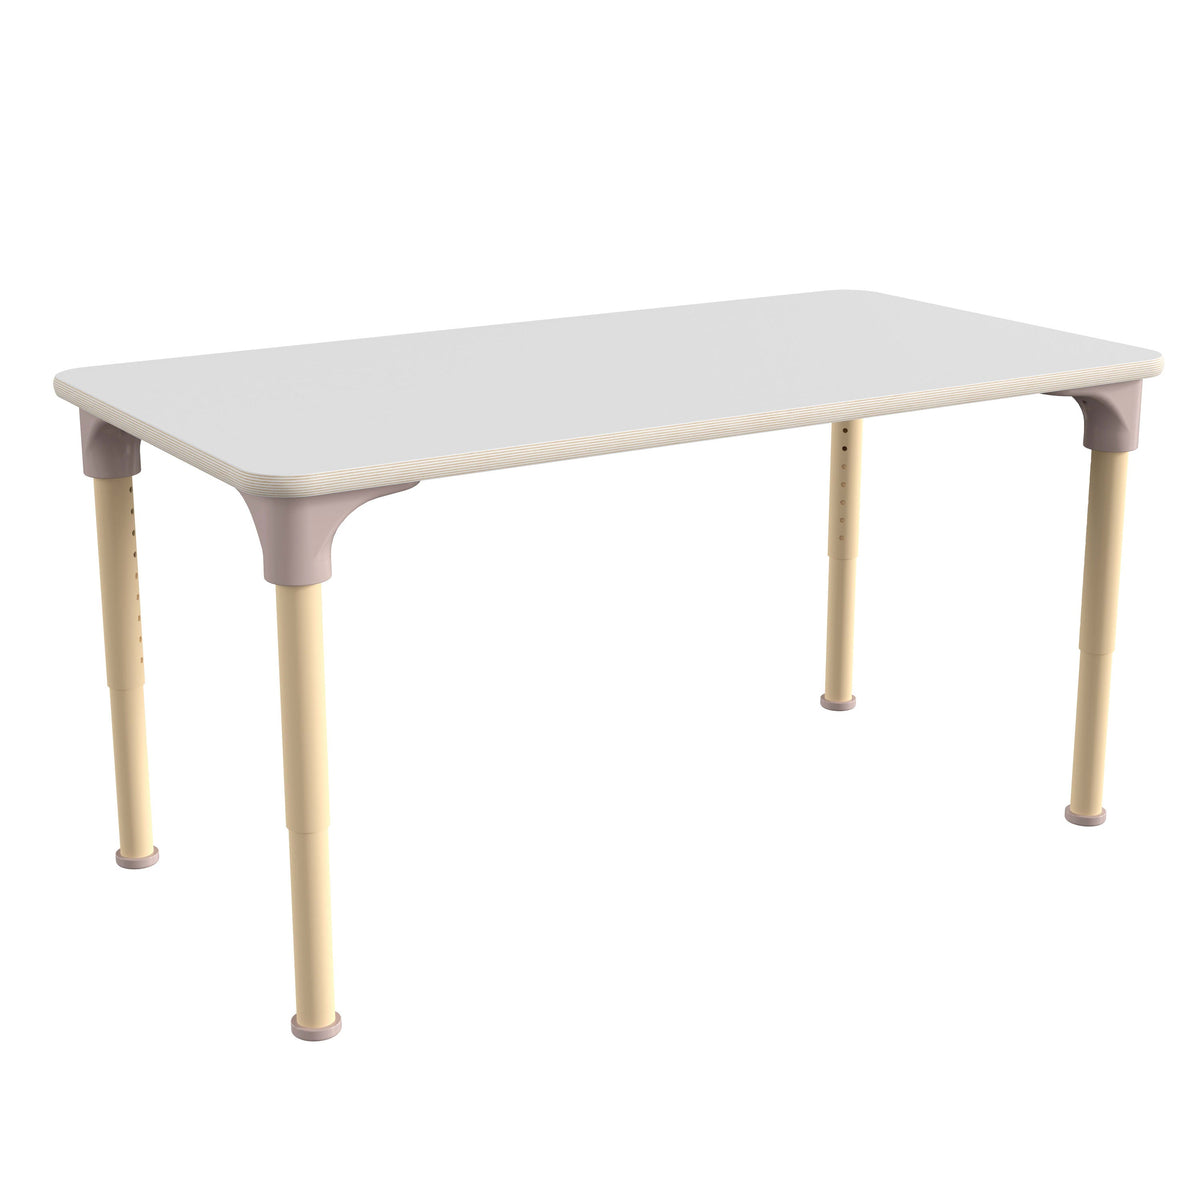 Commercial Grade Adjustable Height Rectangle Wood Activity Table - Beech/White